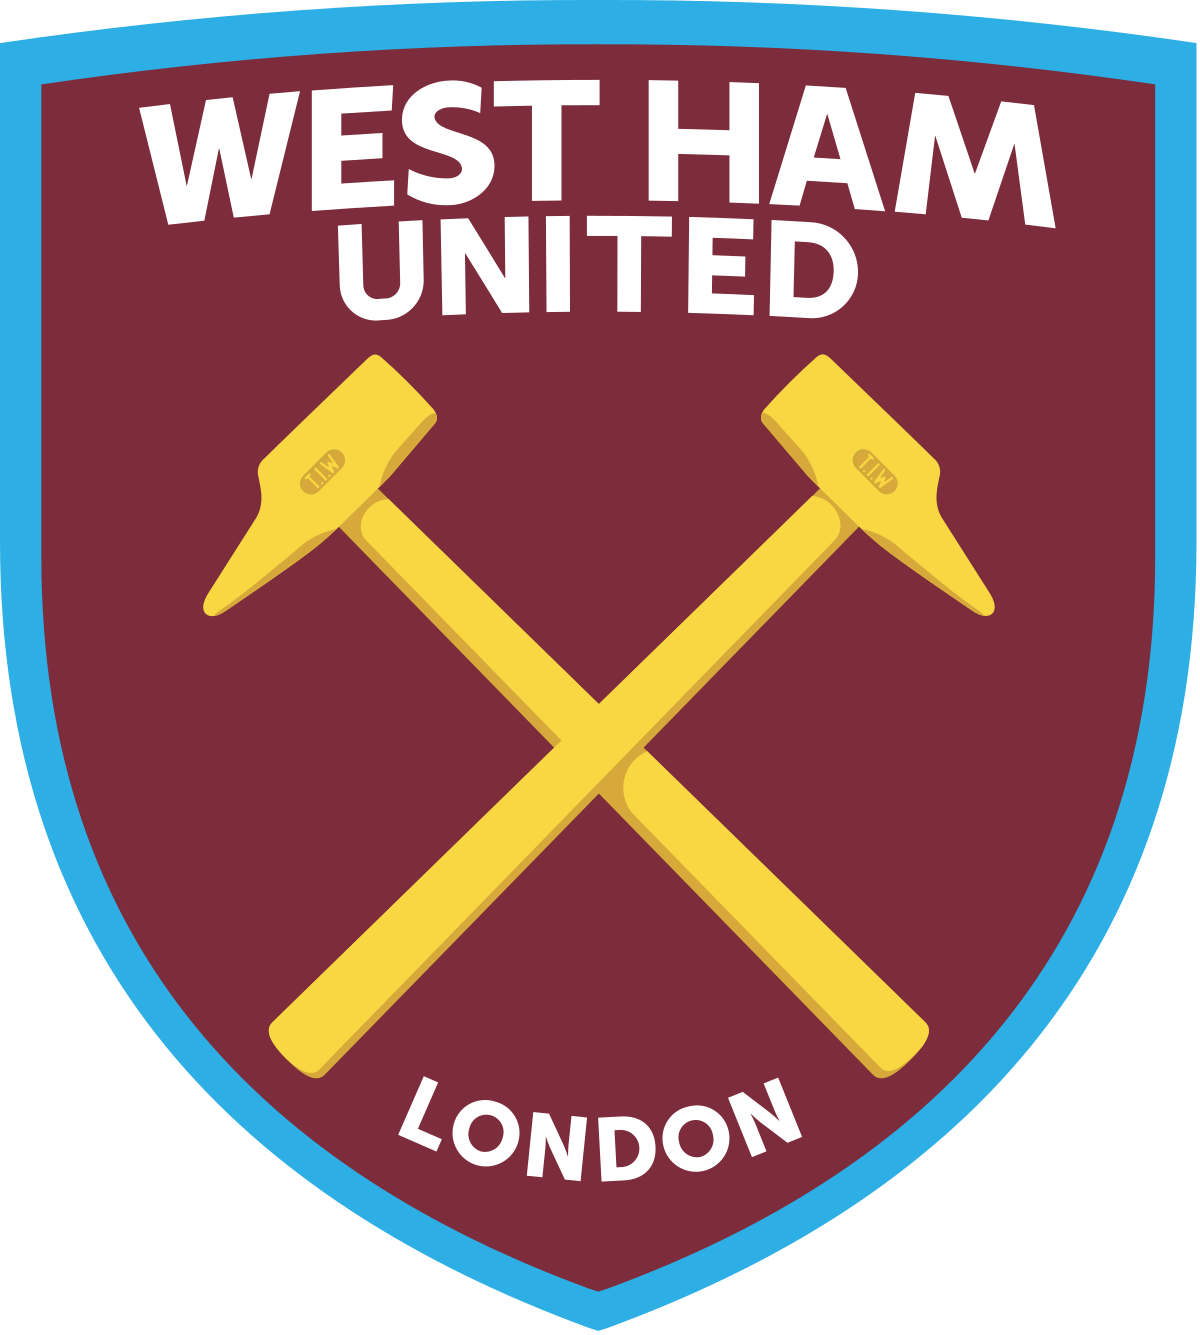 Funny west ham facts